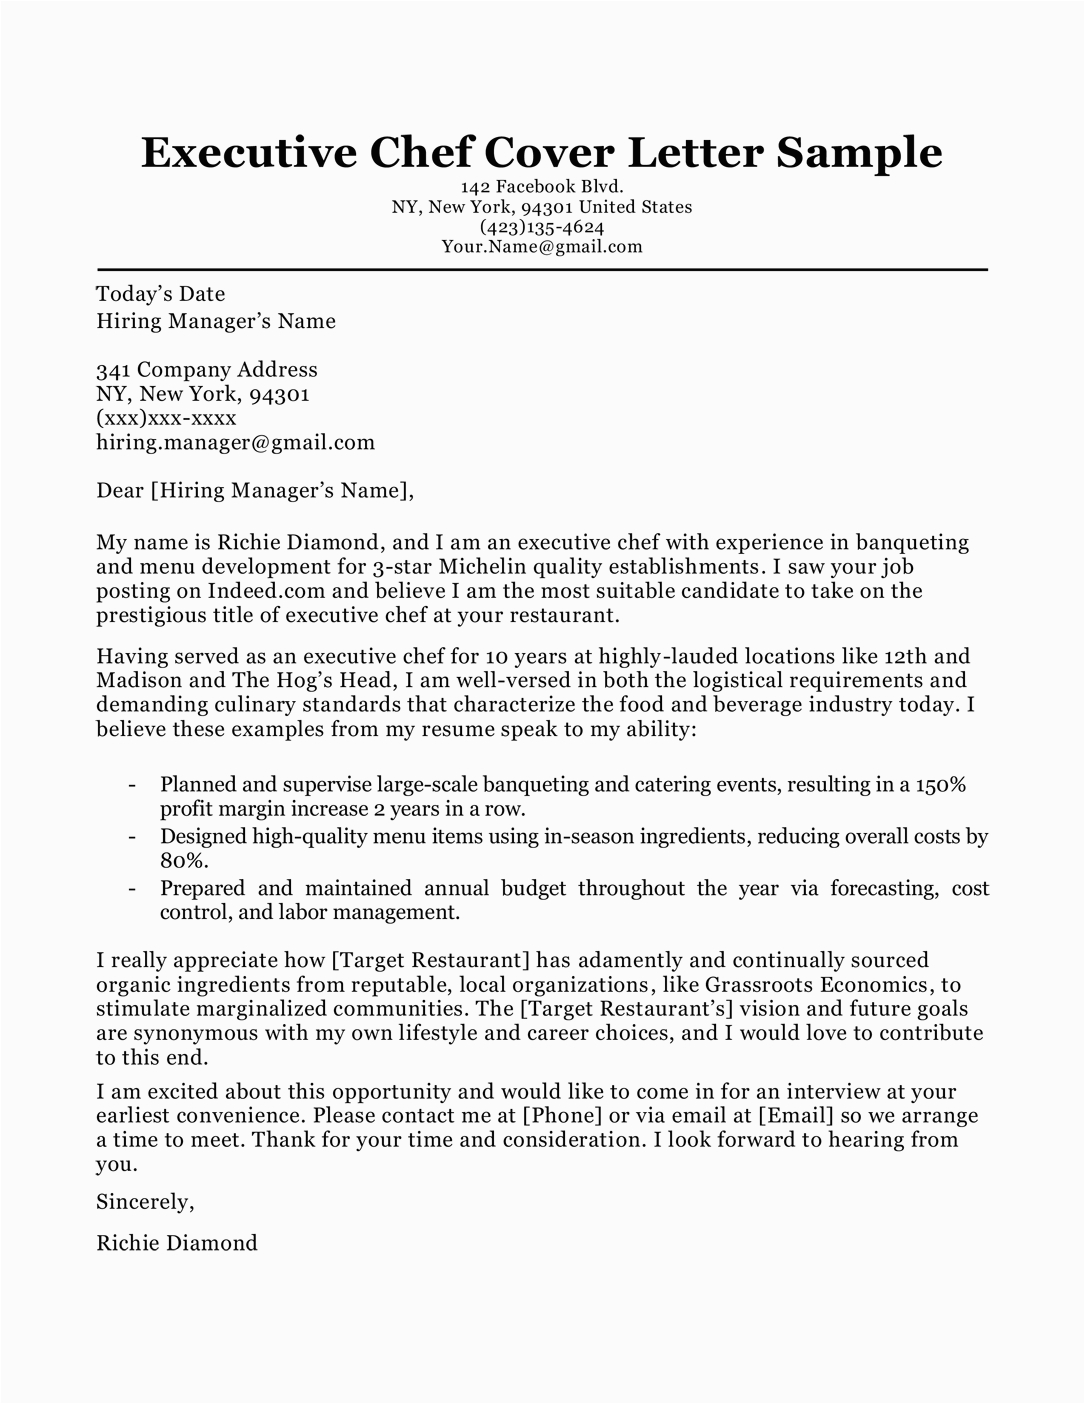 Sample Cover Letter for Cook Resume Chef Cover Letter Sample & Writing Tips